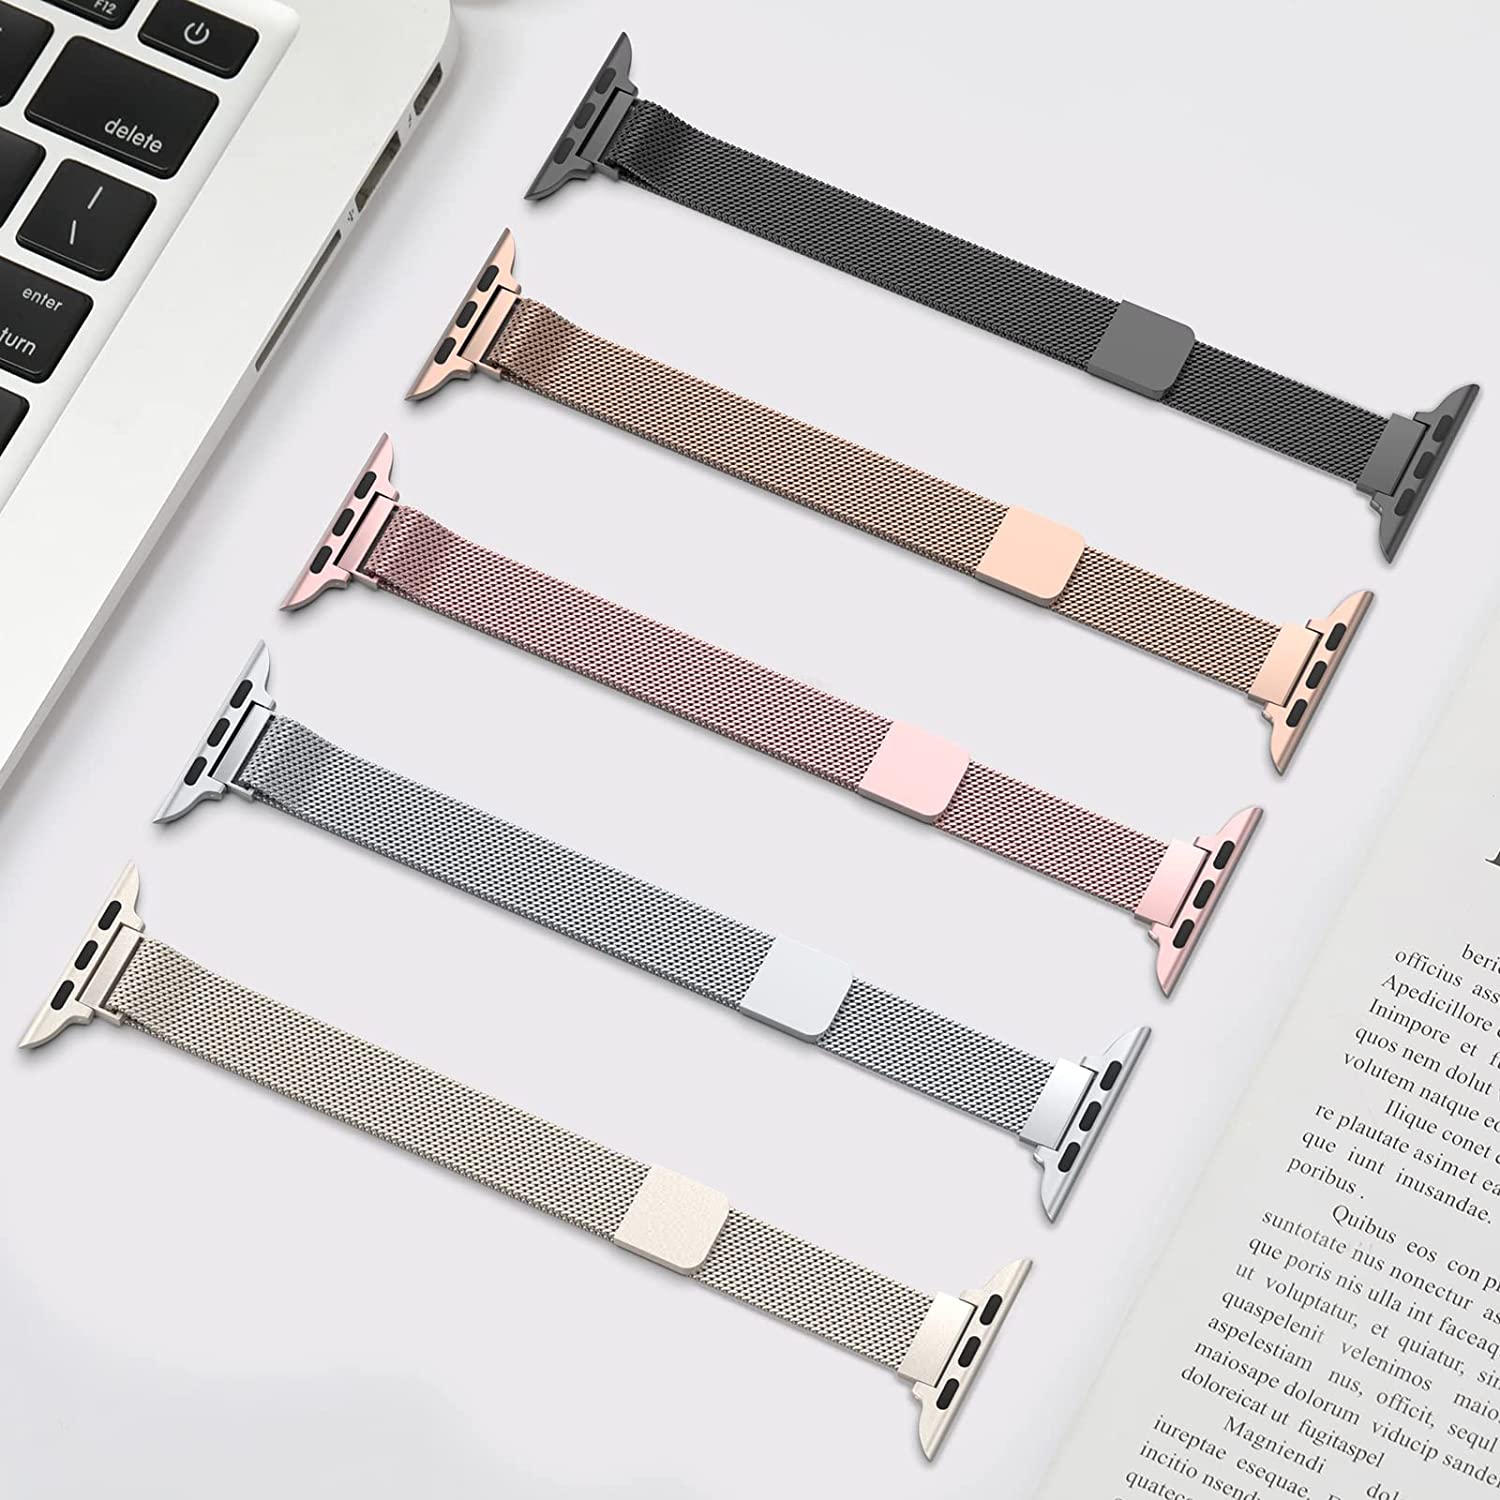 Stainless Steel Slim & Thin Bands for Apple iWatch Mesh Magnetic Clasp Strap